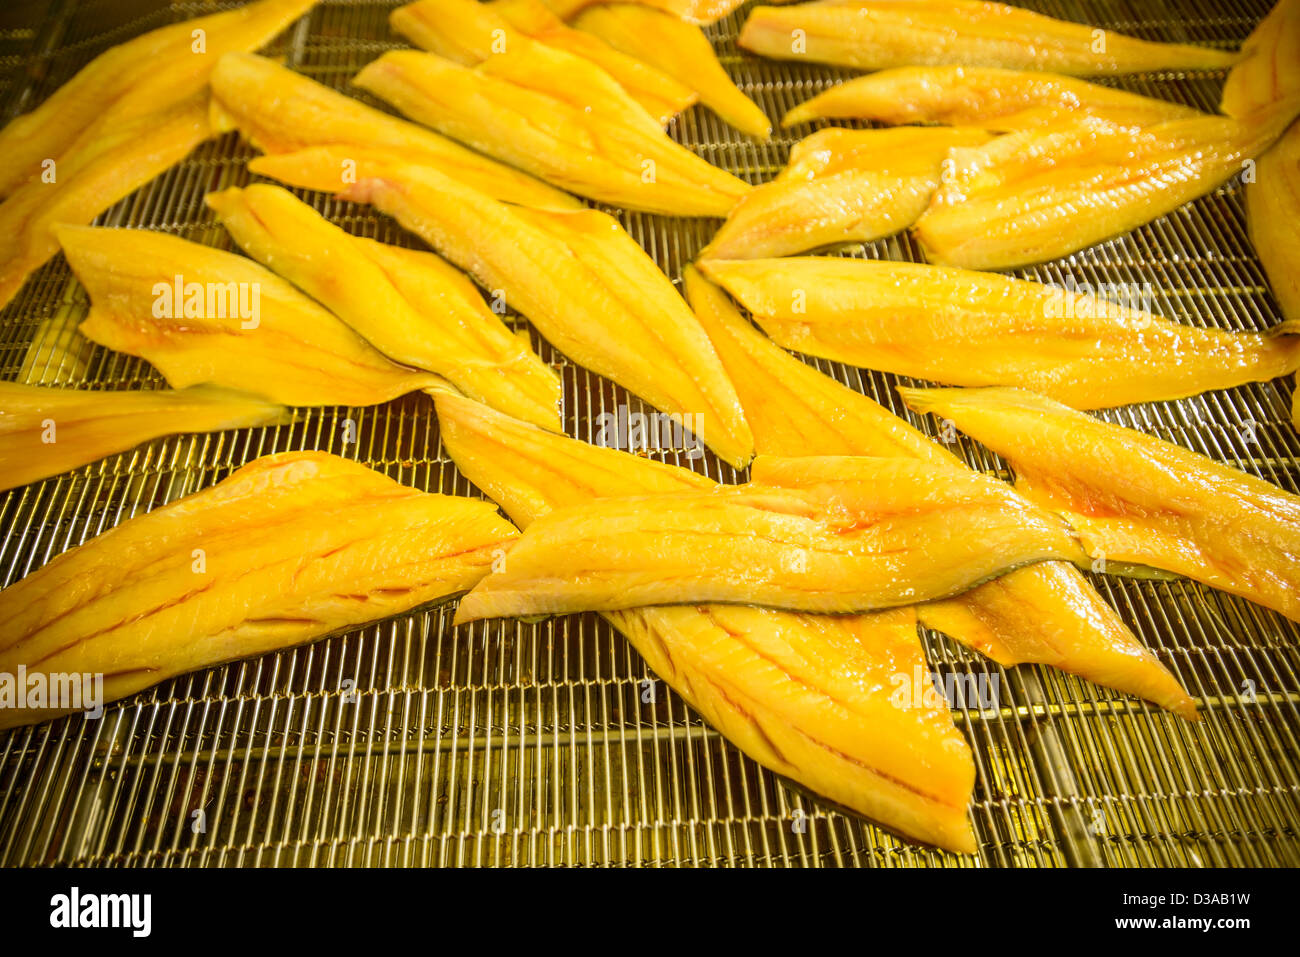 Haddock fish being prepared for smoking in food factory Stock Photo